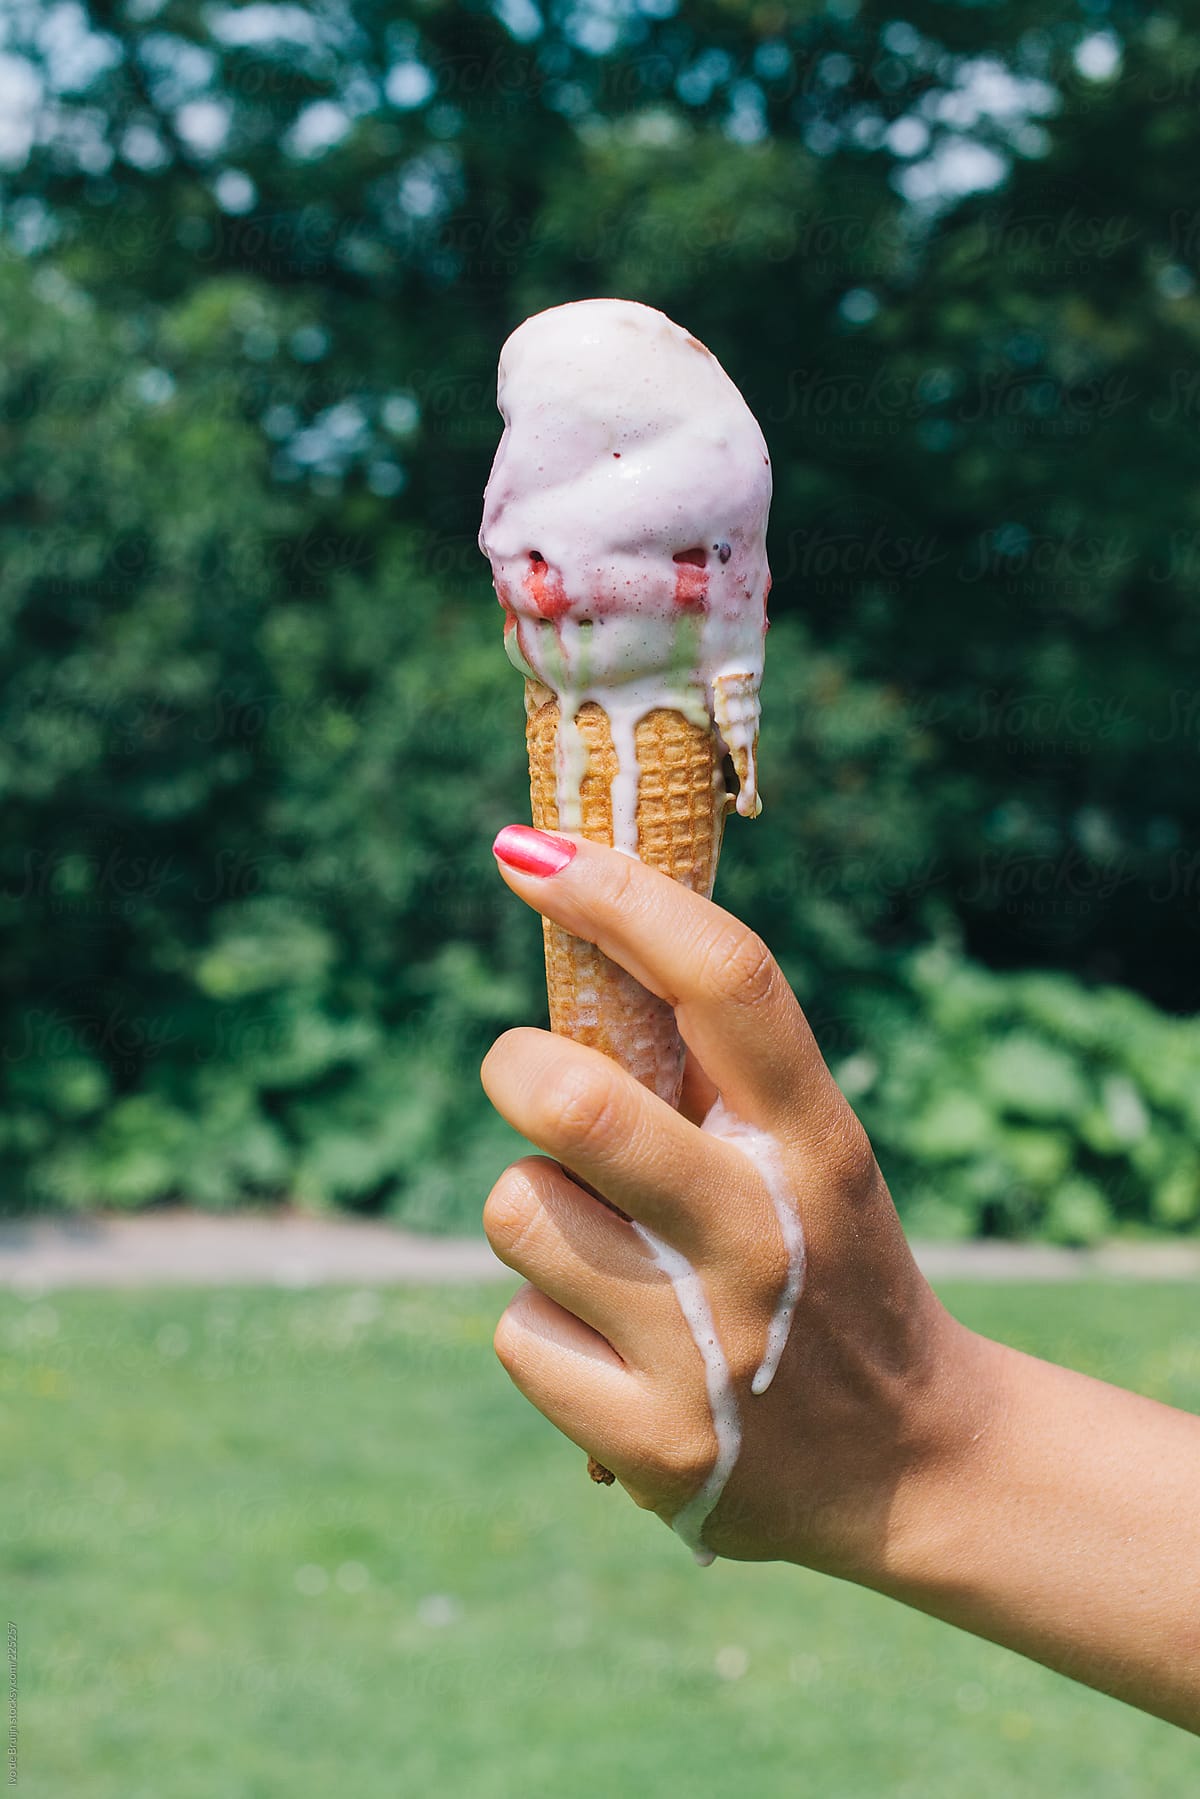 A woman's hand holding a melting colourful icecream in her hand